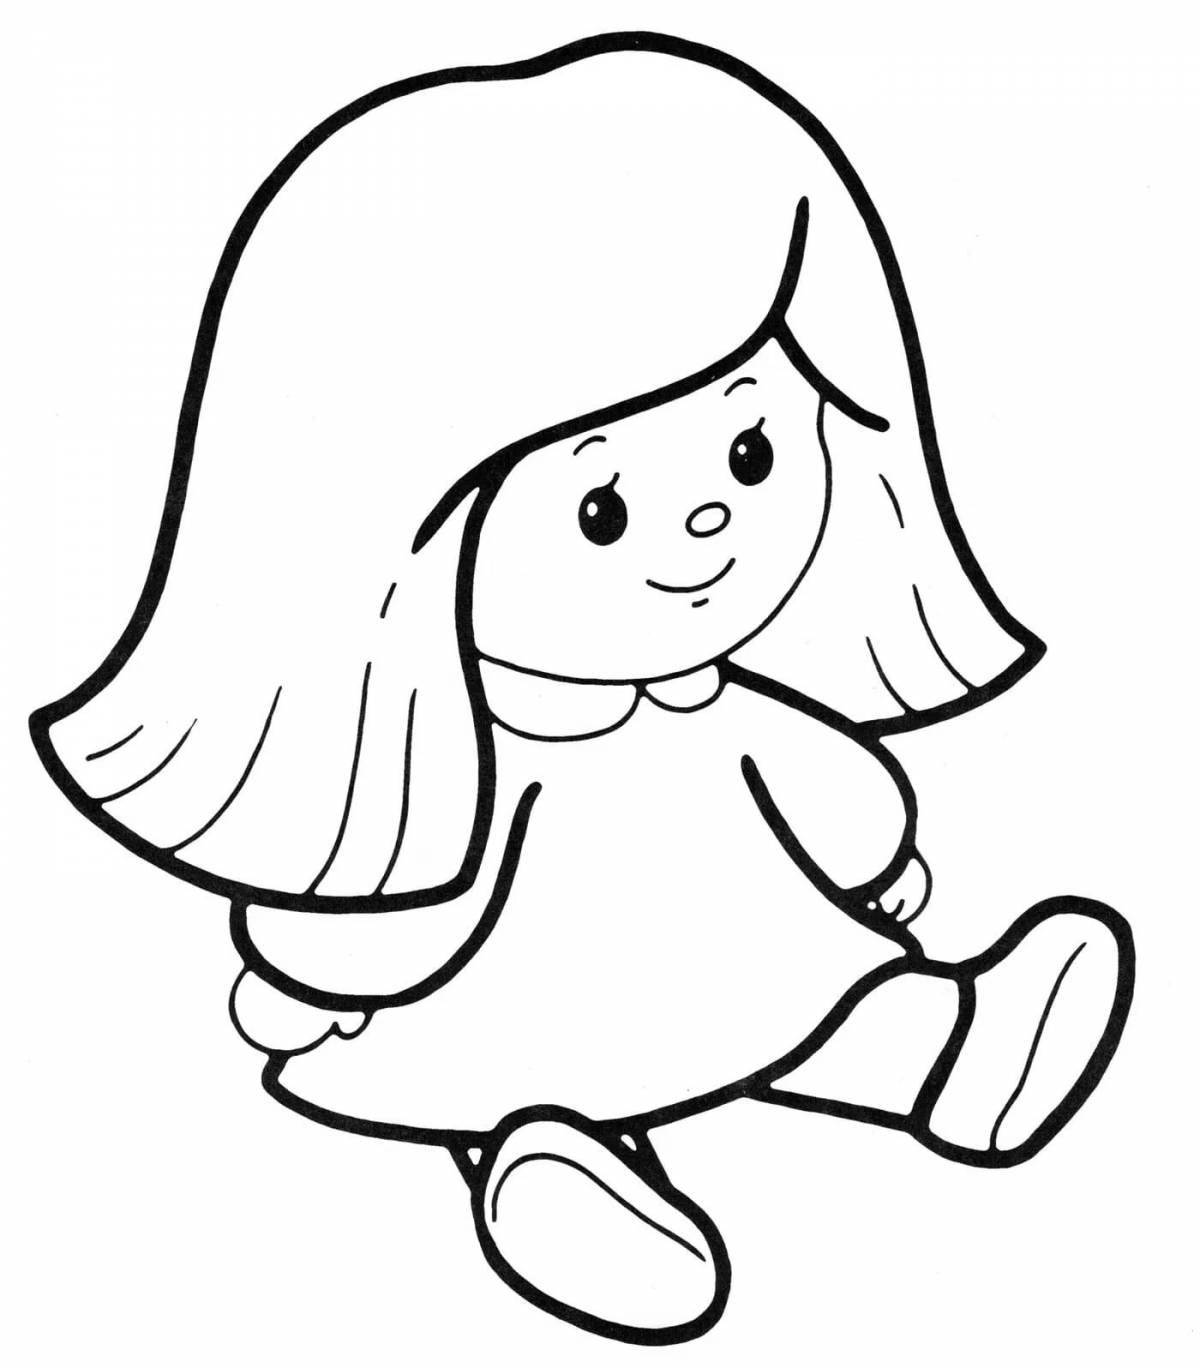 Colour explosion coloring pages for girls 2 3